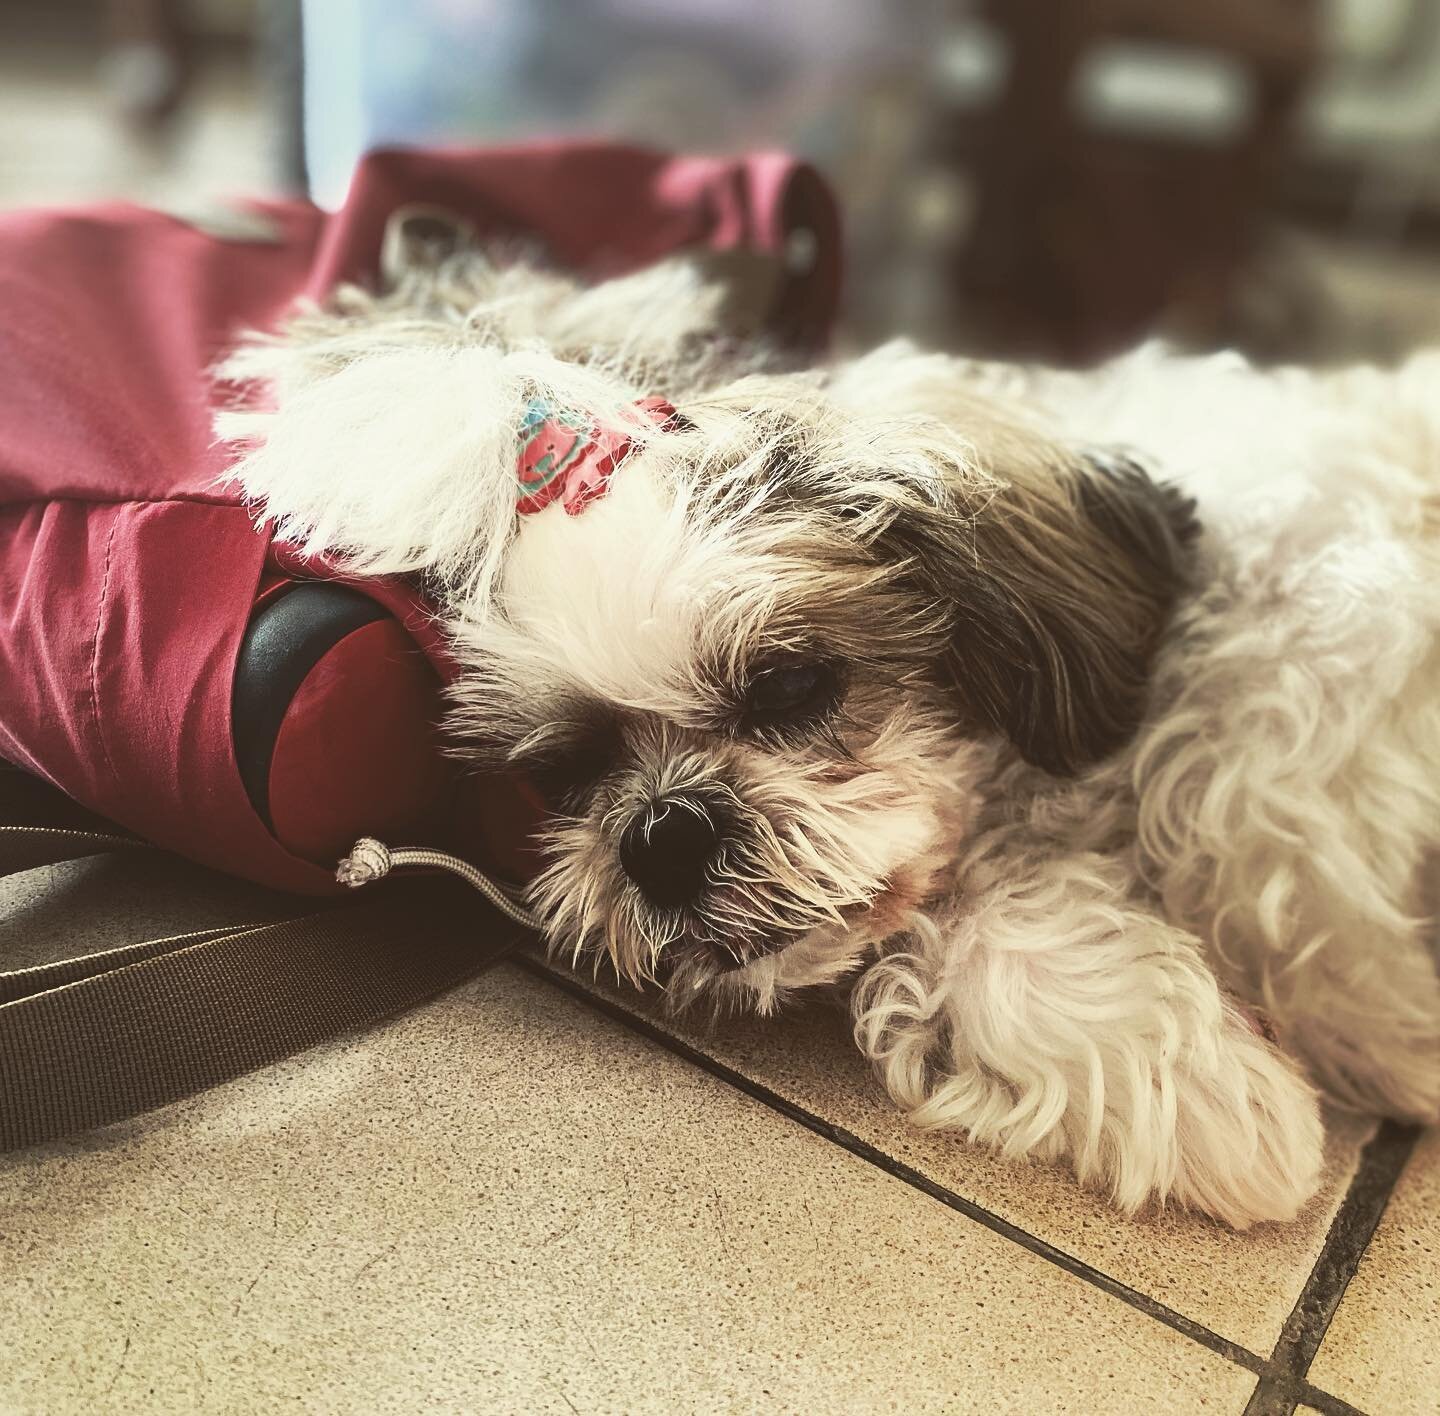 Daisy, a lovely 14 year old Shih Tzu, walked over to our therapist&rsquo;s bag once her first massage session with us was completed and went on to snooze happily on it. 

Our therapist admits the bag must be smelly now that so many dogs have licked ?